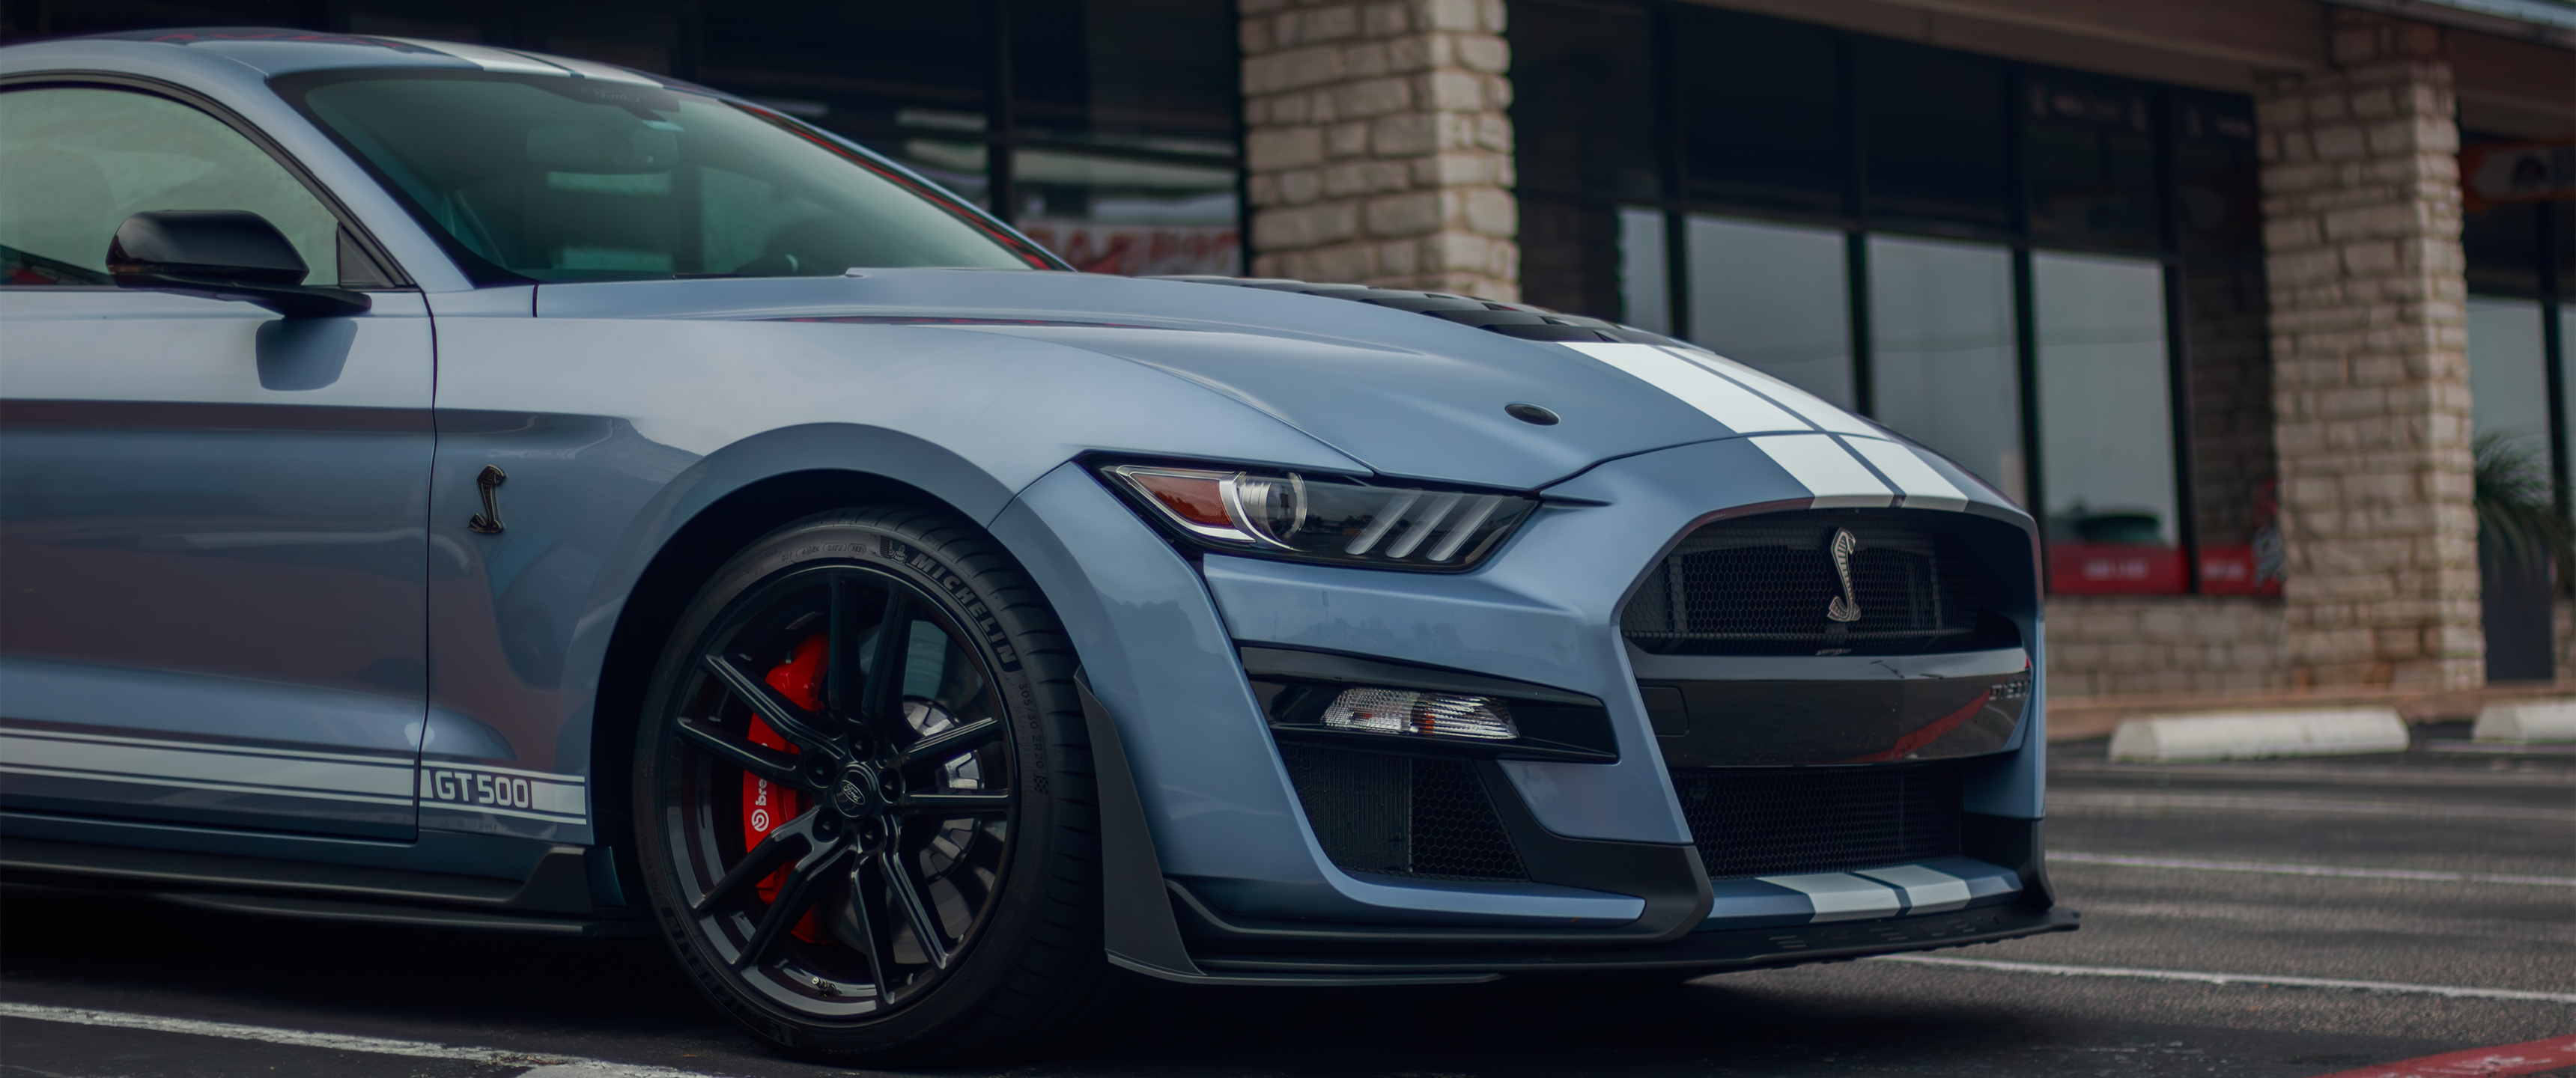 General 3440x1440 car Ford Mustang Ford Mustang Shelby mustang Dark Horse parking lot parking vehicle frontal view